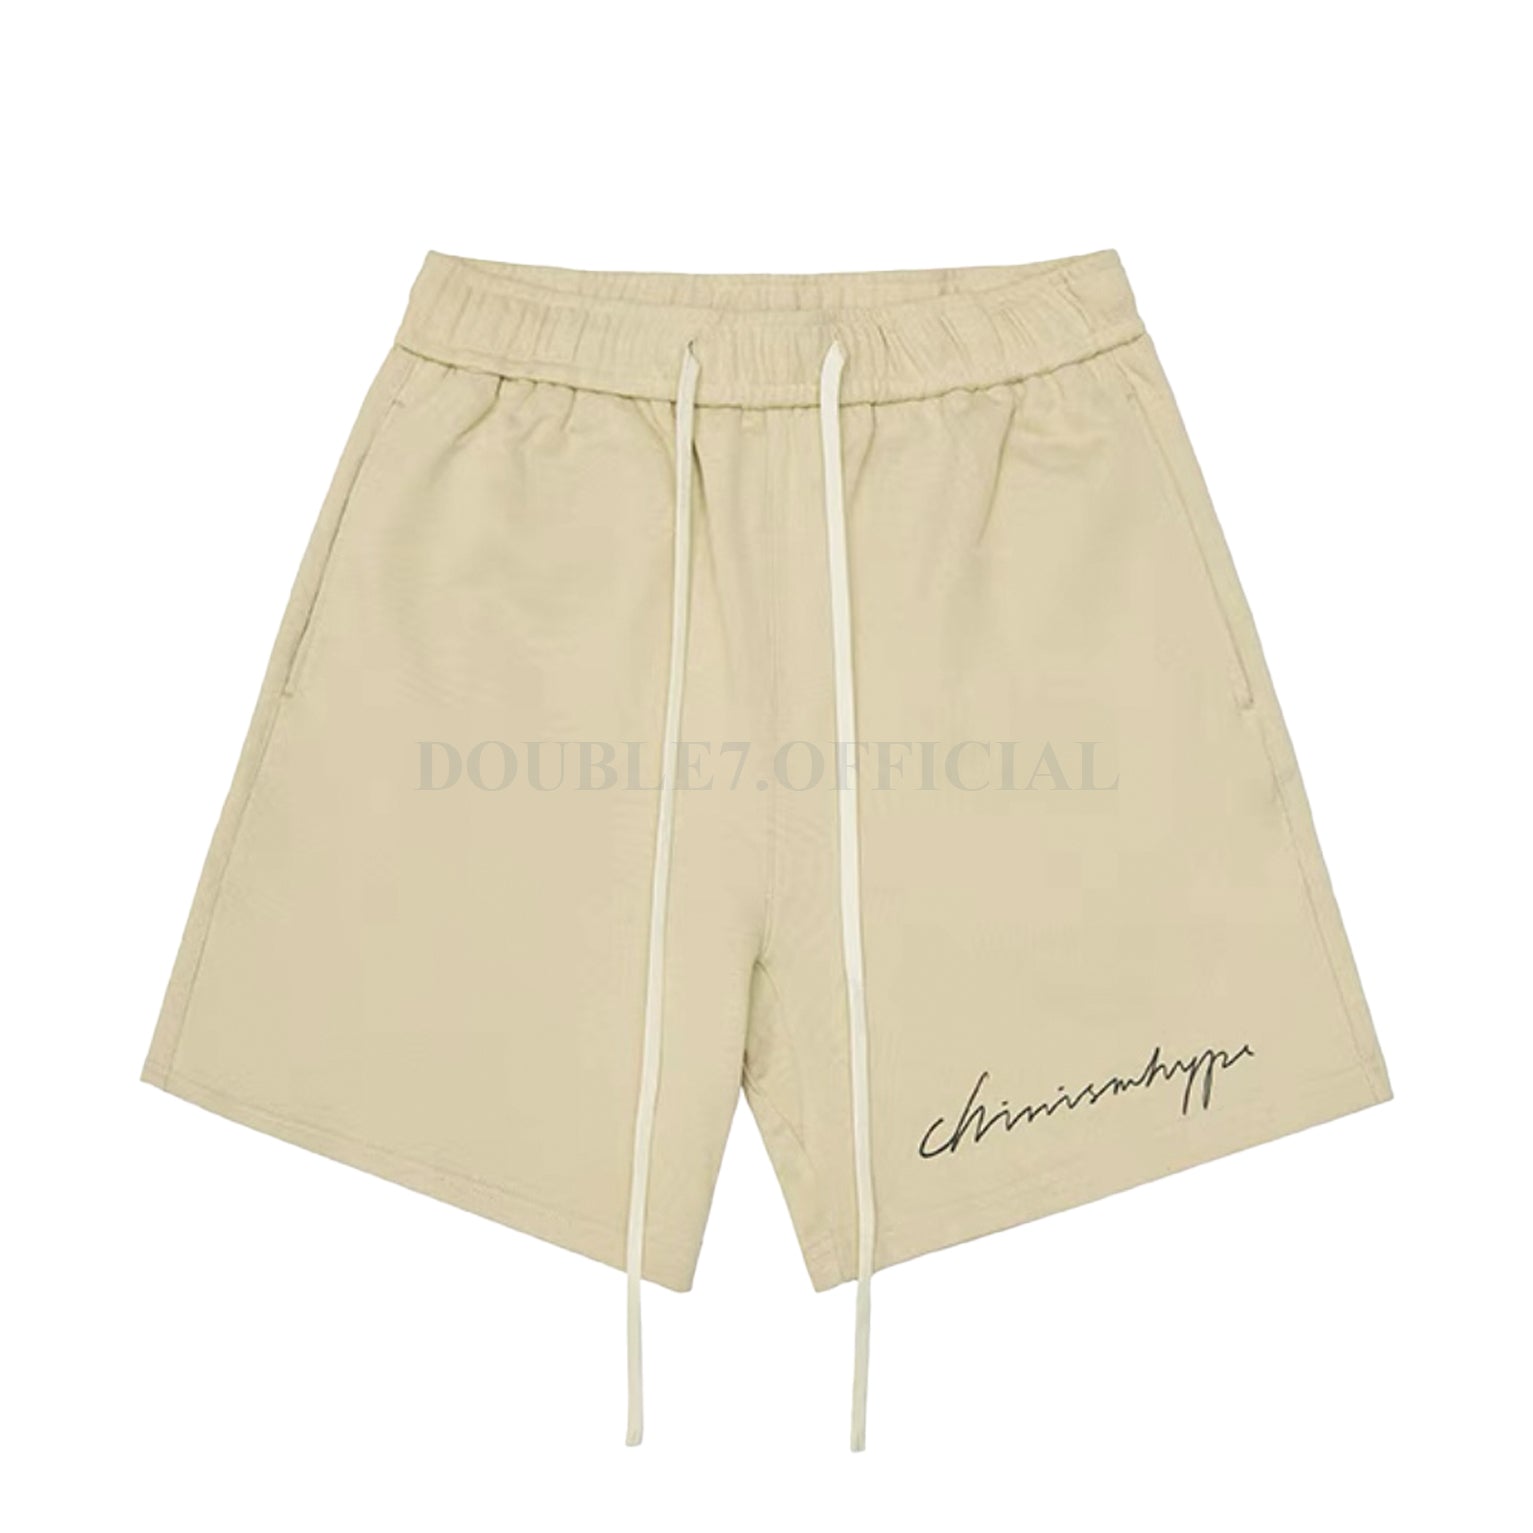 Chinism "Daily Blank" Logo Short (Preorder)